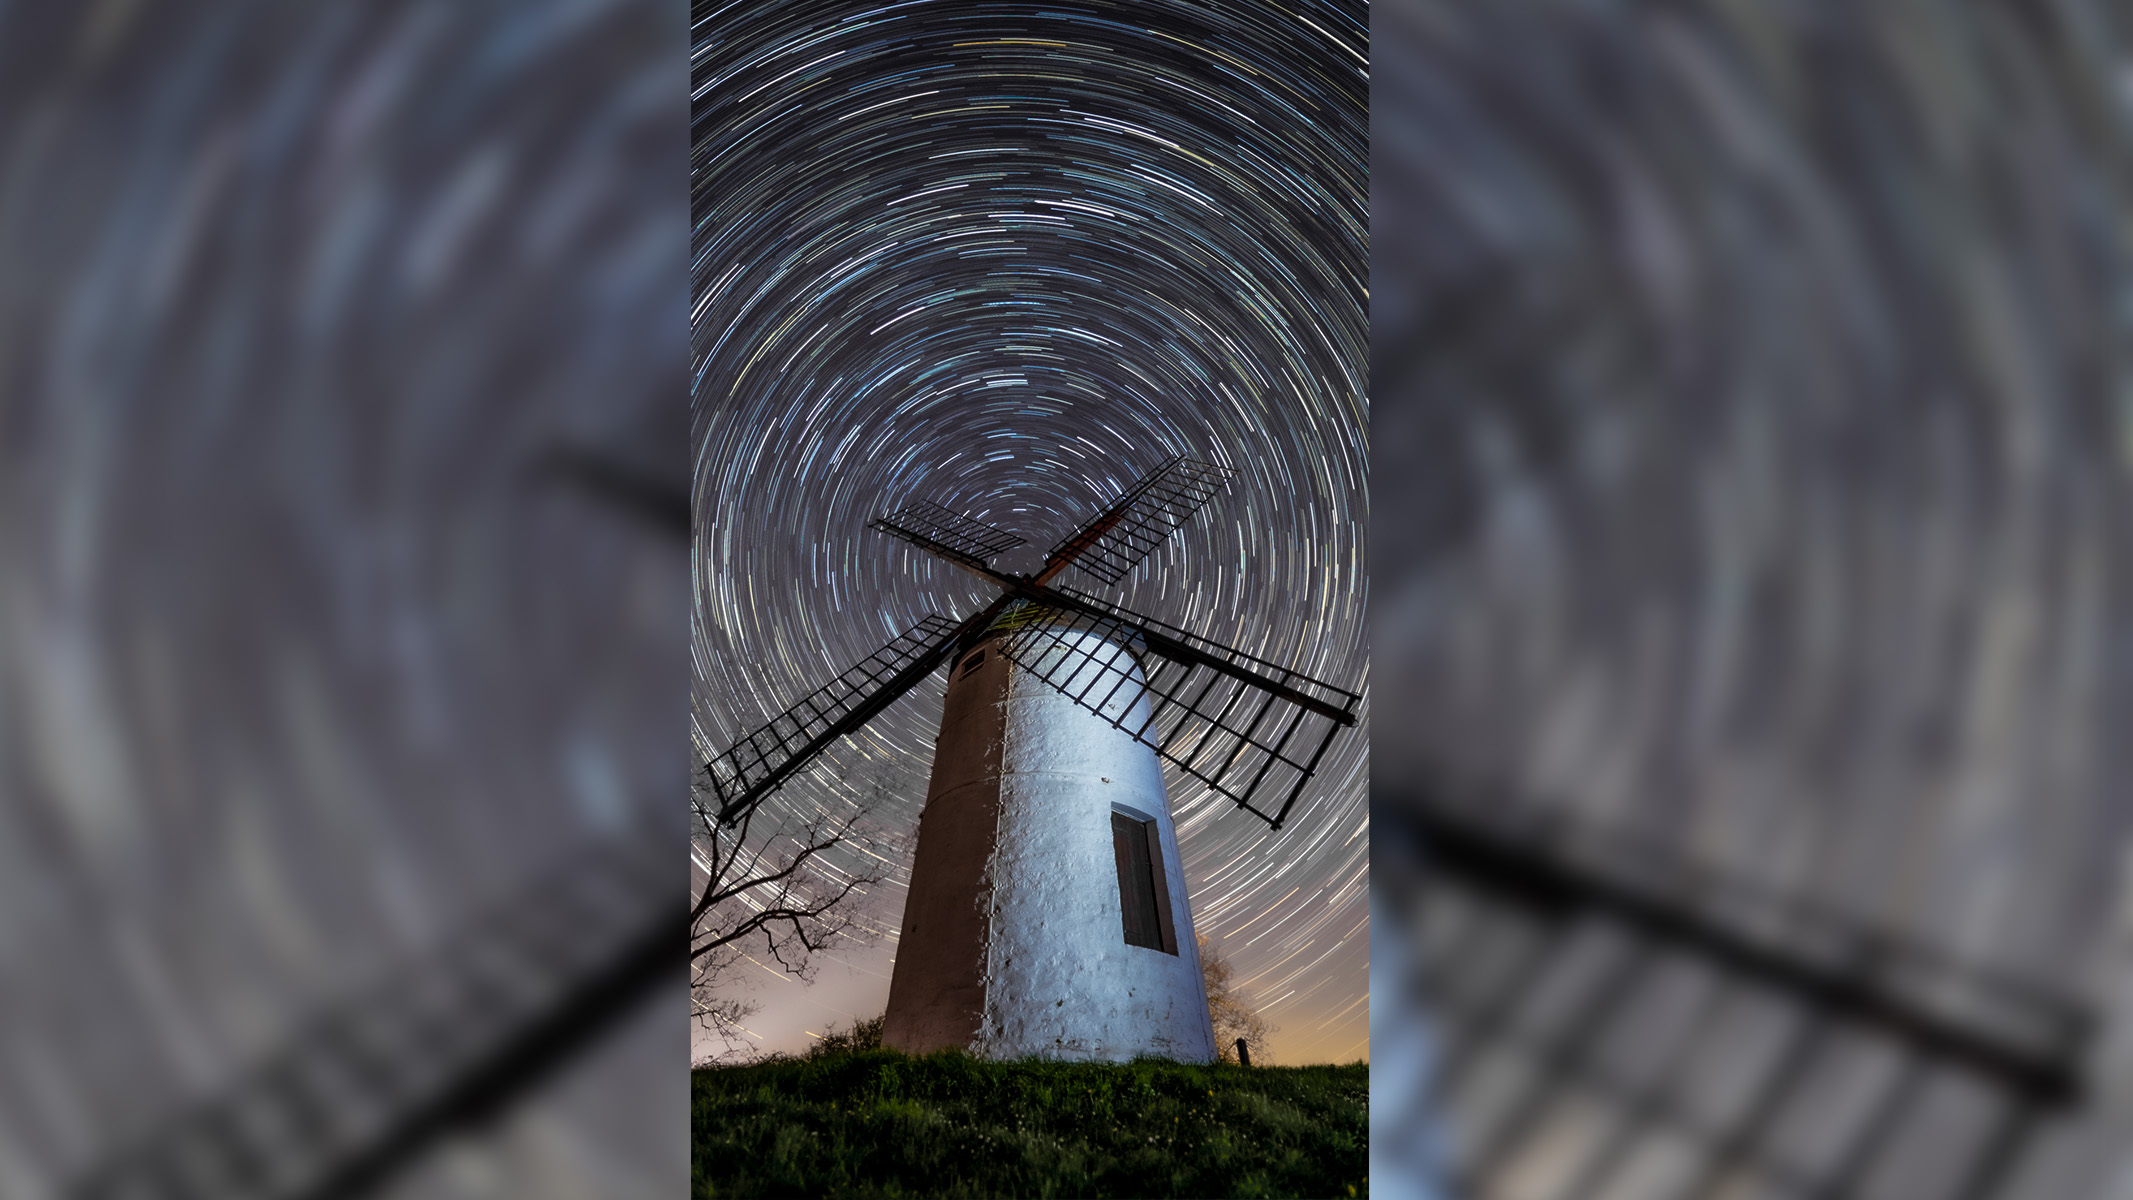 Ashton Windmill in the UK, with a circular star trail in the background